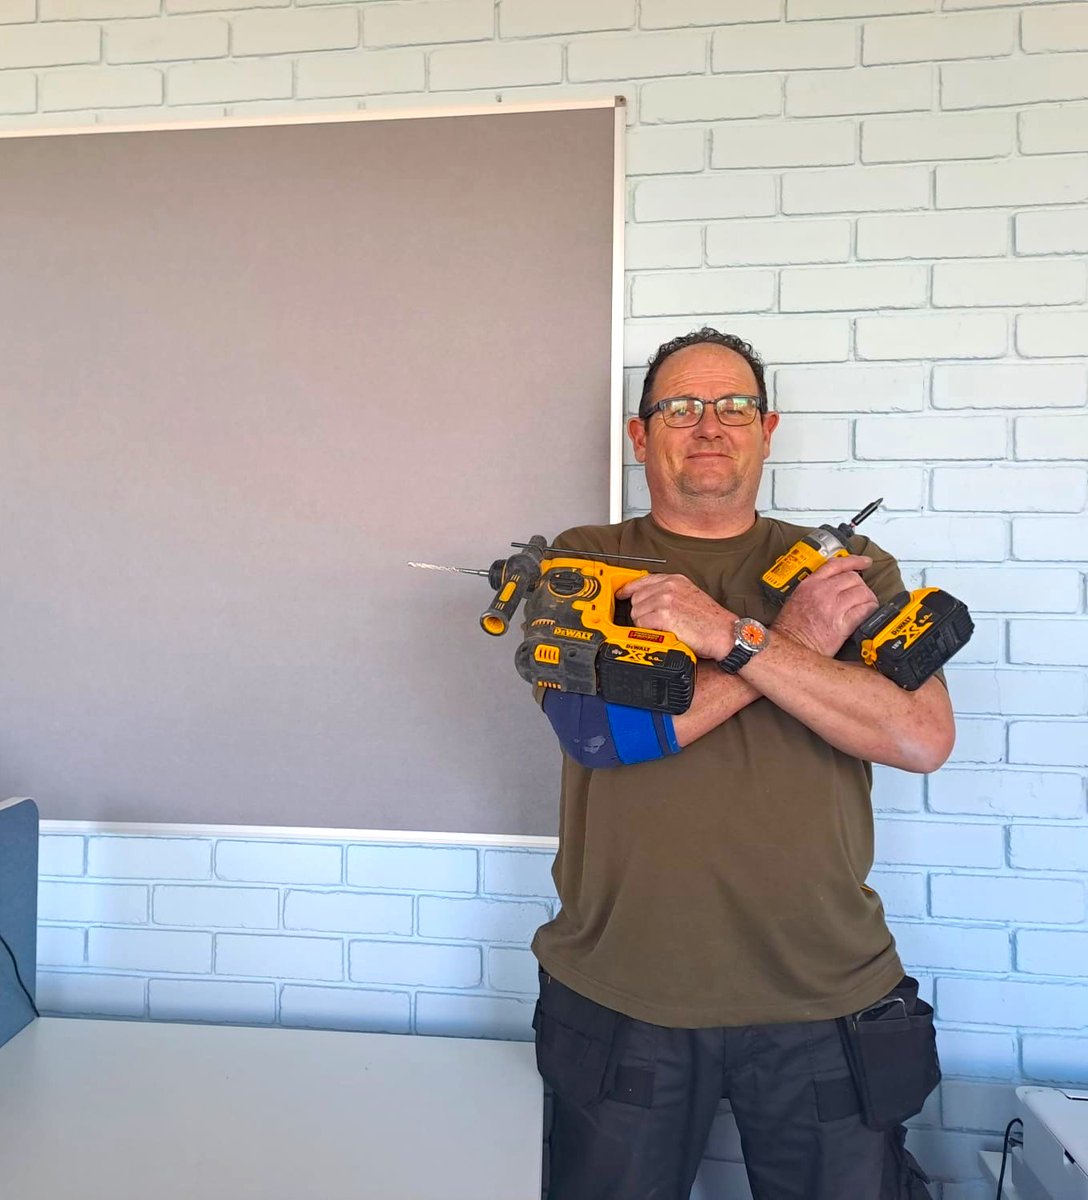 🛠️Big shoutout to superstar John🌟for volunteering his handyman skills all day today at our #PortsmouthDSA charity centre putting up notice boards and more! Thank you for helping to make our space better for our families! 🛠️✨#CommunityHero #Volunteer